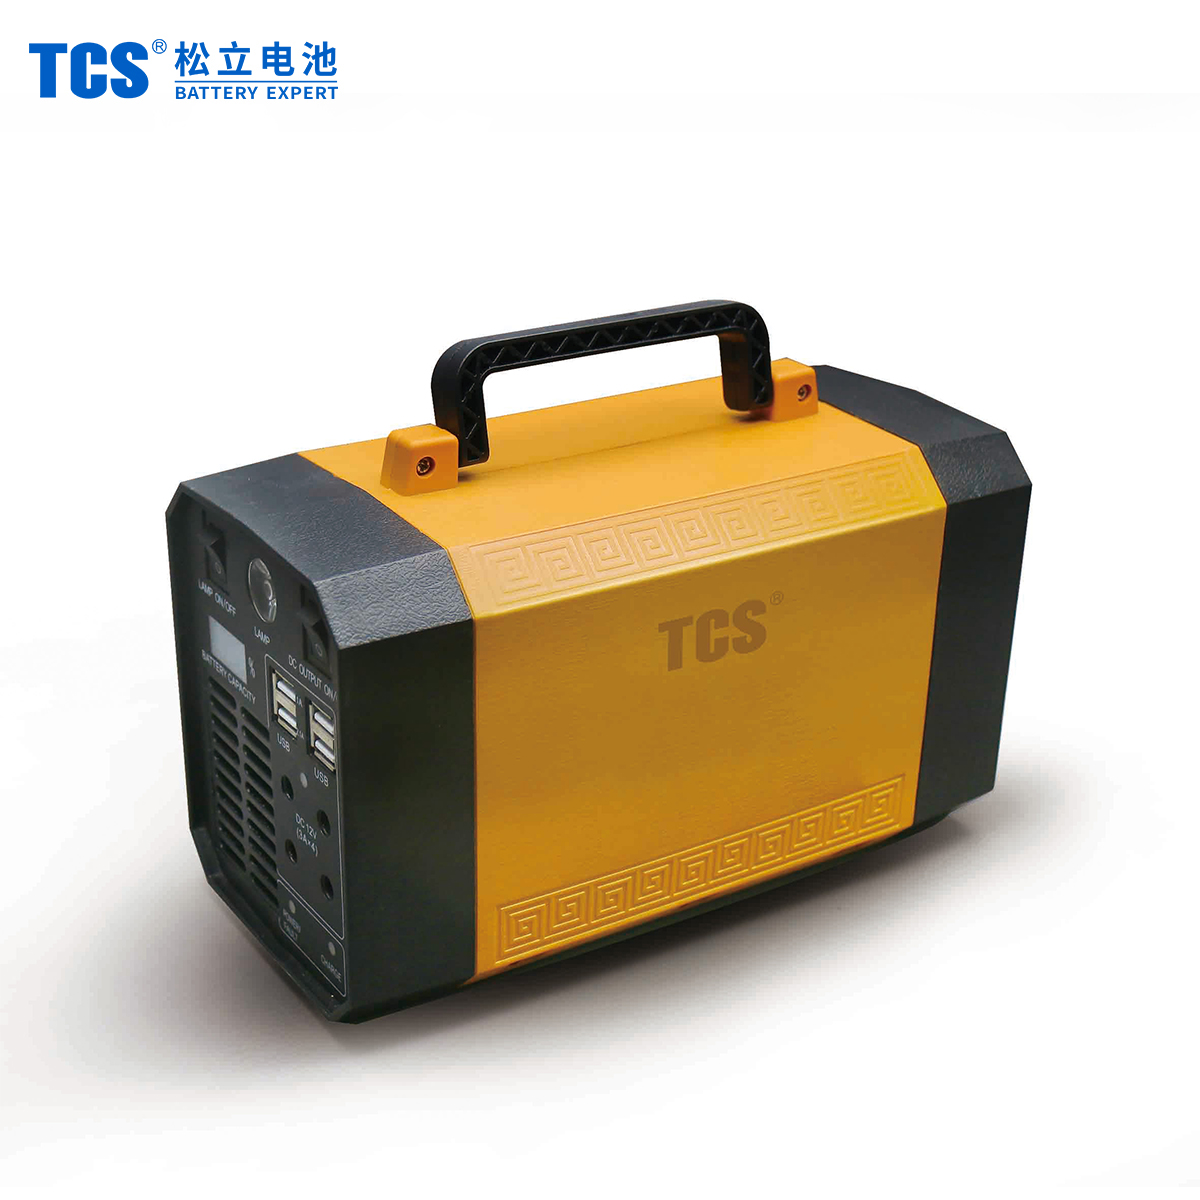 Outdoor Portable Power Supply Lithium Battery TLB300 TCS Battery